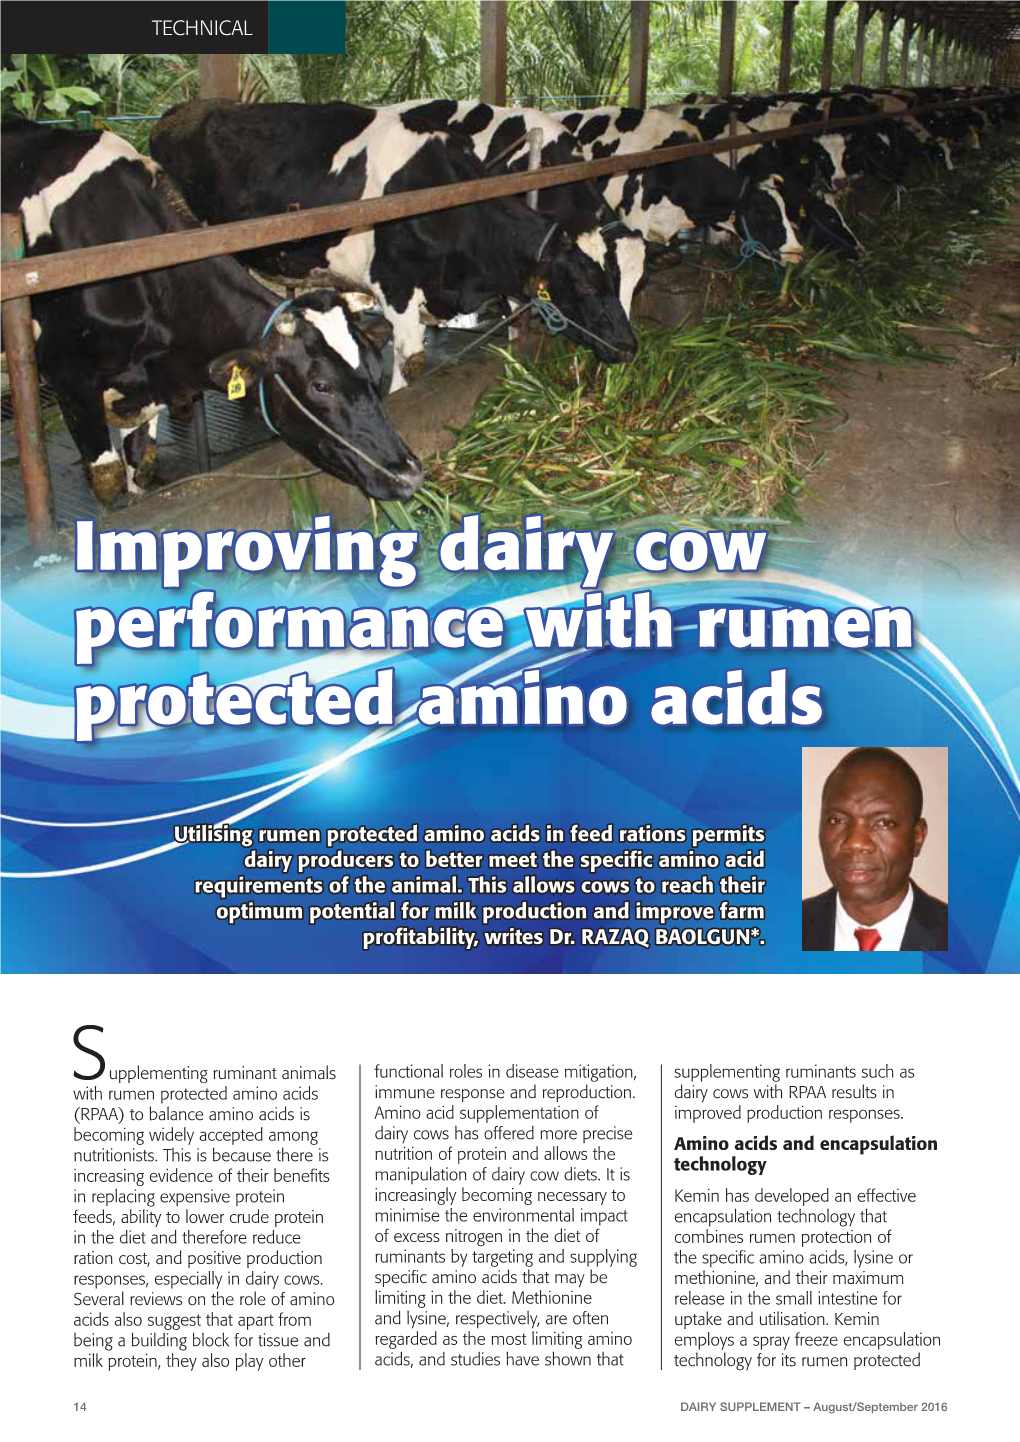 Improving Dairy Cow Performance with Rumen Protected Amino Acids